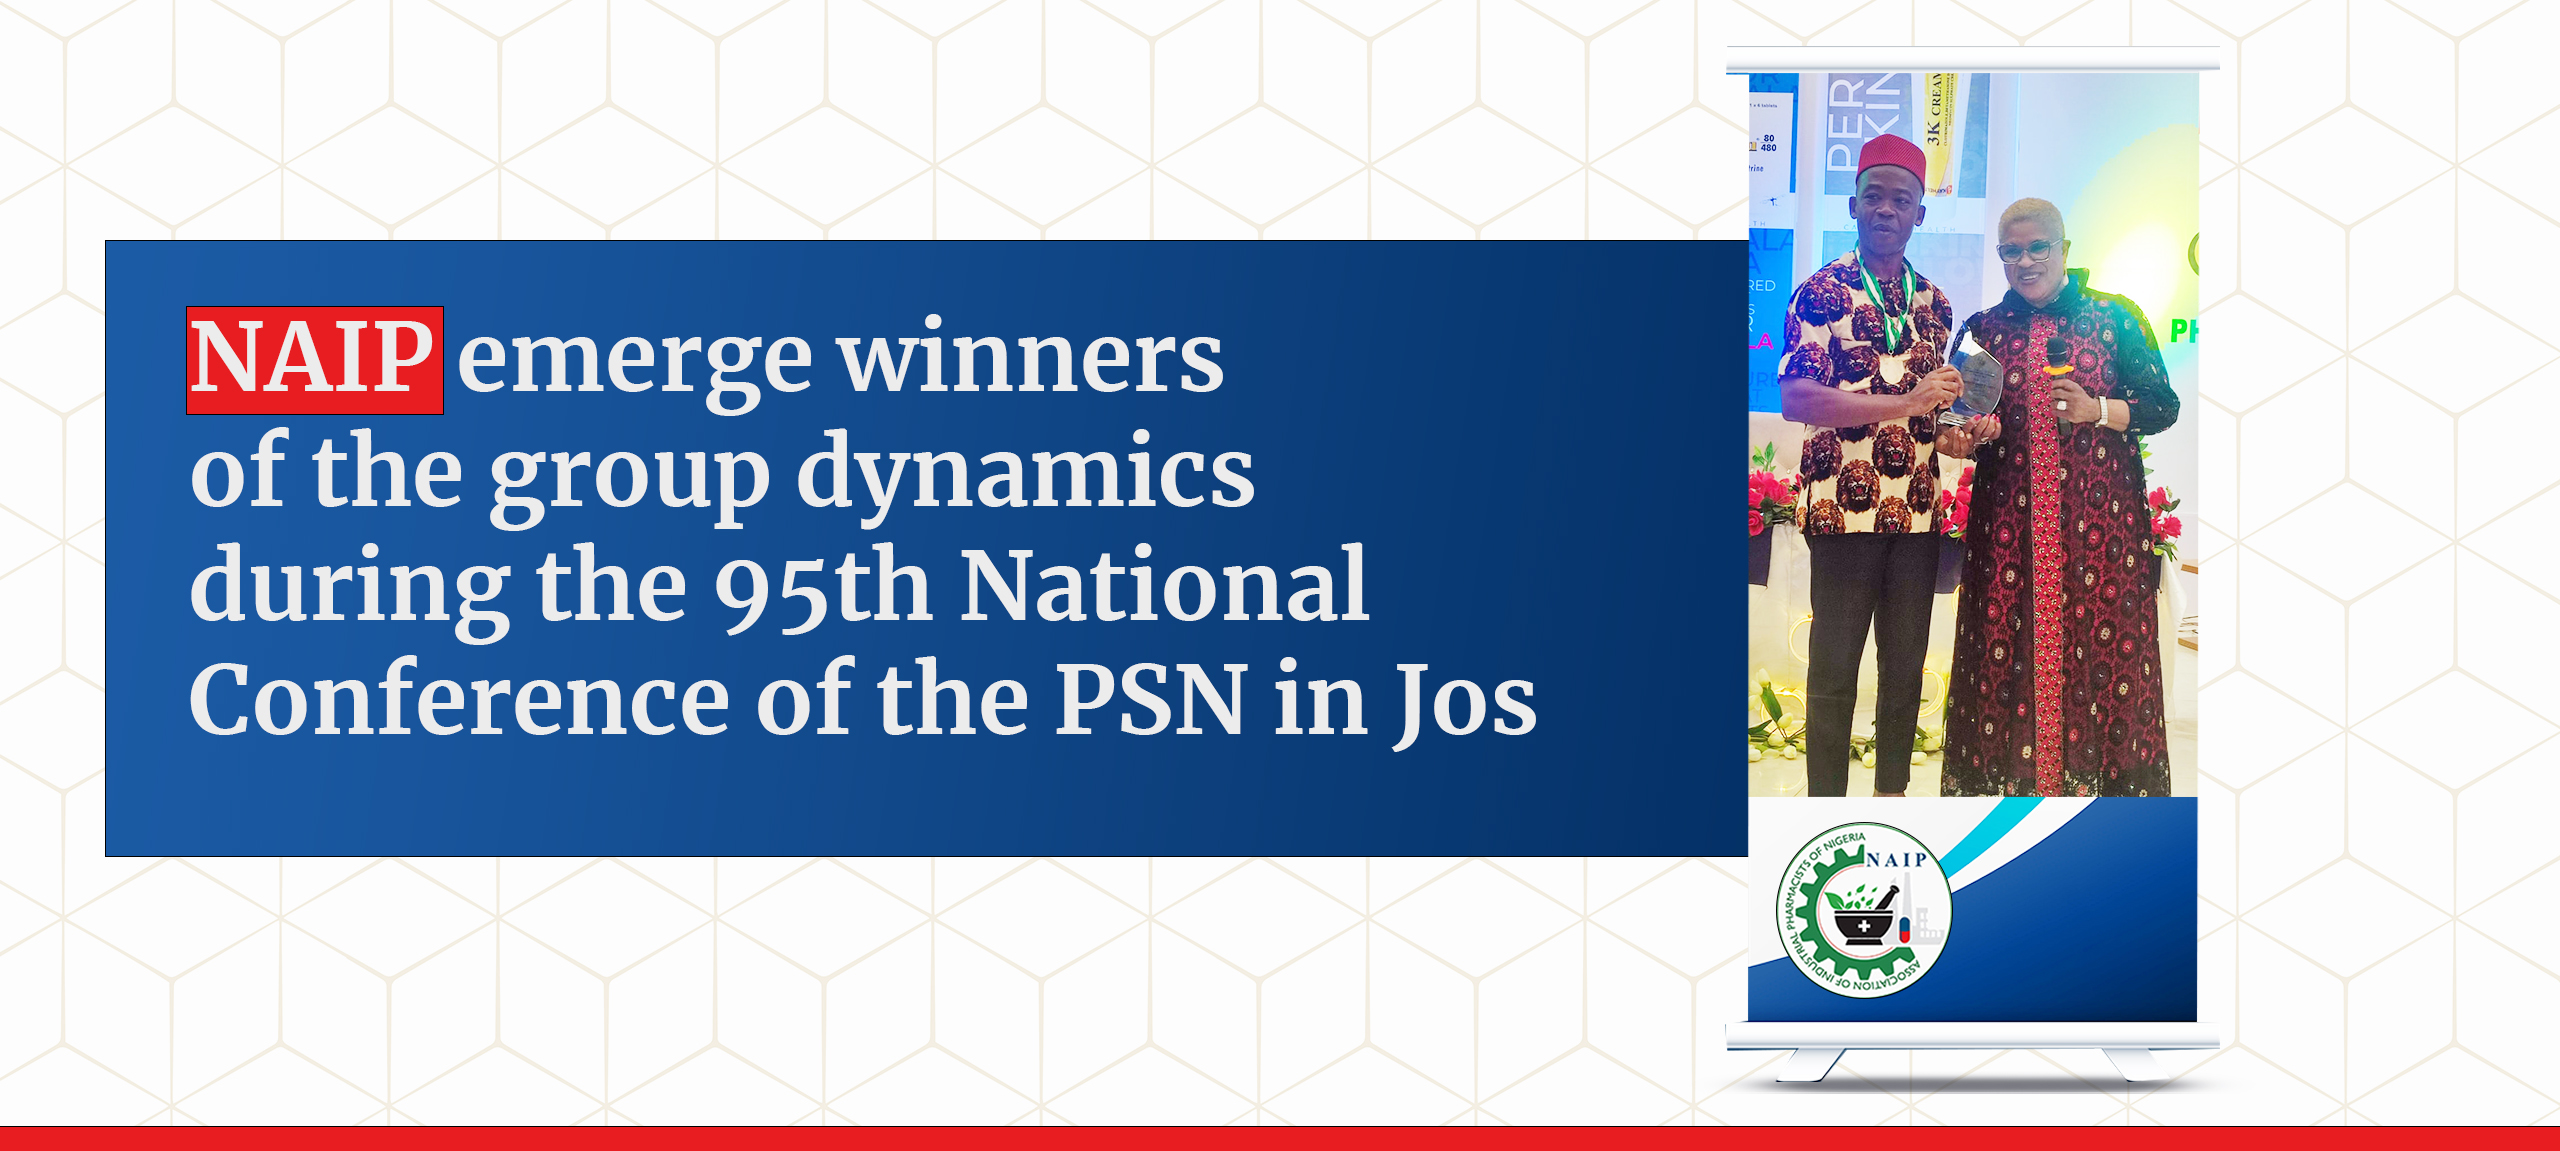 NAIP emerge winners of the group dynamics during the 95th National conference of the PSN in Jos 2